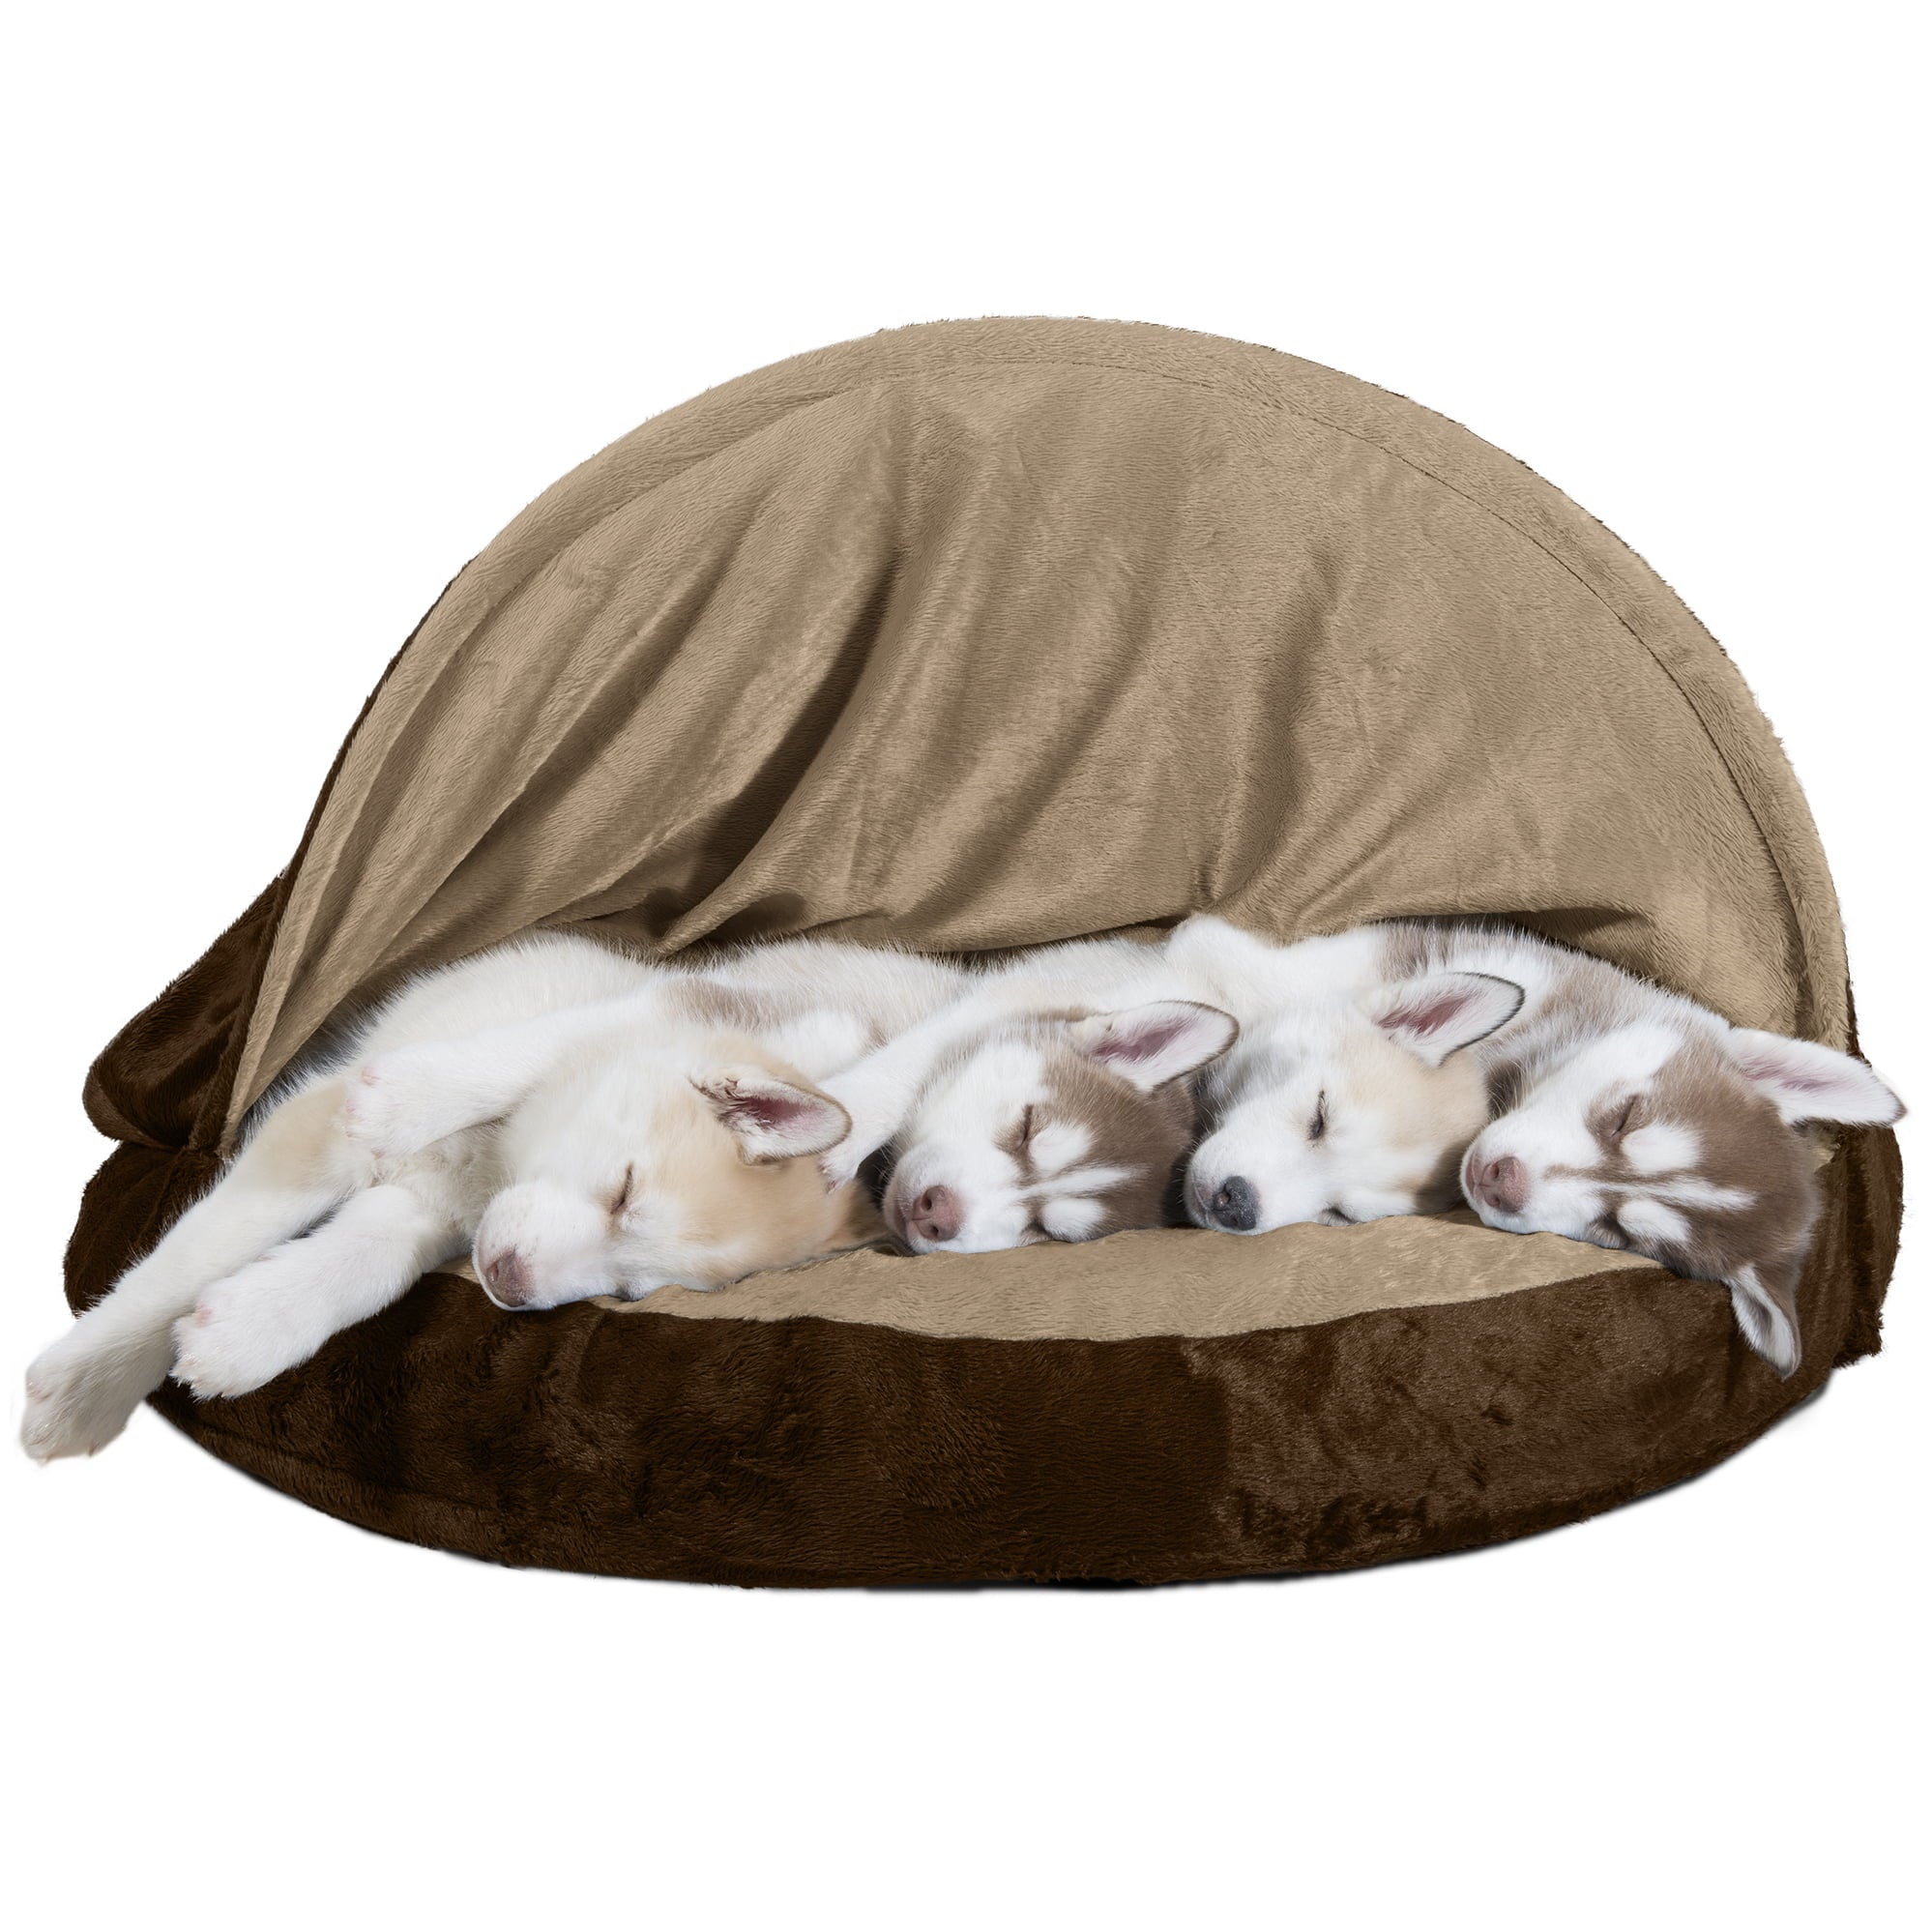 FurHaven Pet Dog Bed | Orthopedic Microvelvet Snuggery Burrow Pet Bed for Dogs and Cats， Espresso， 35-inch